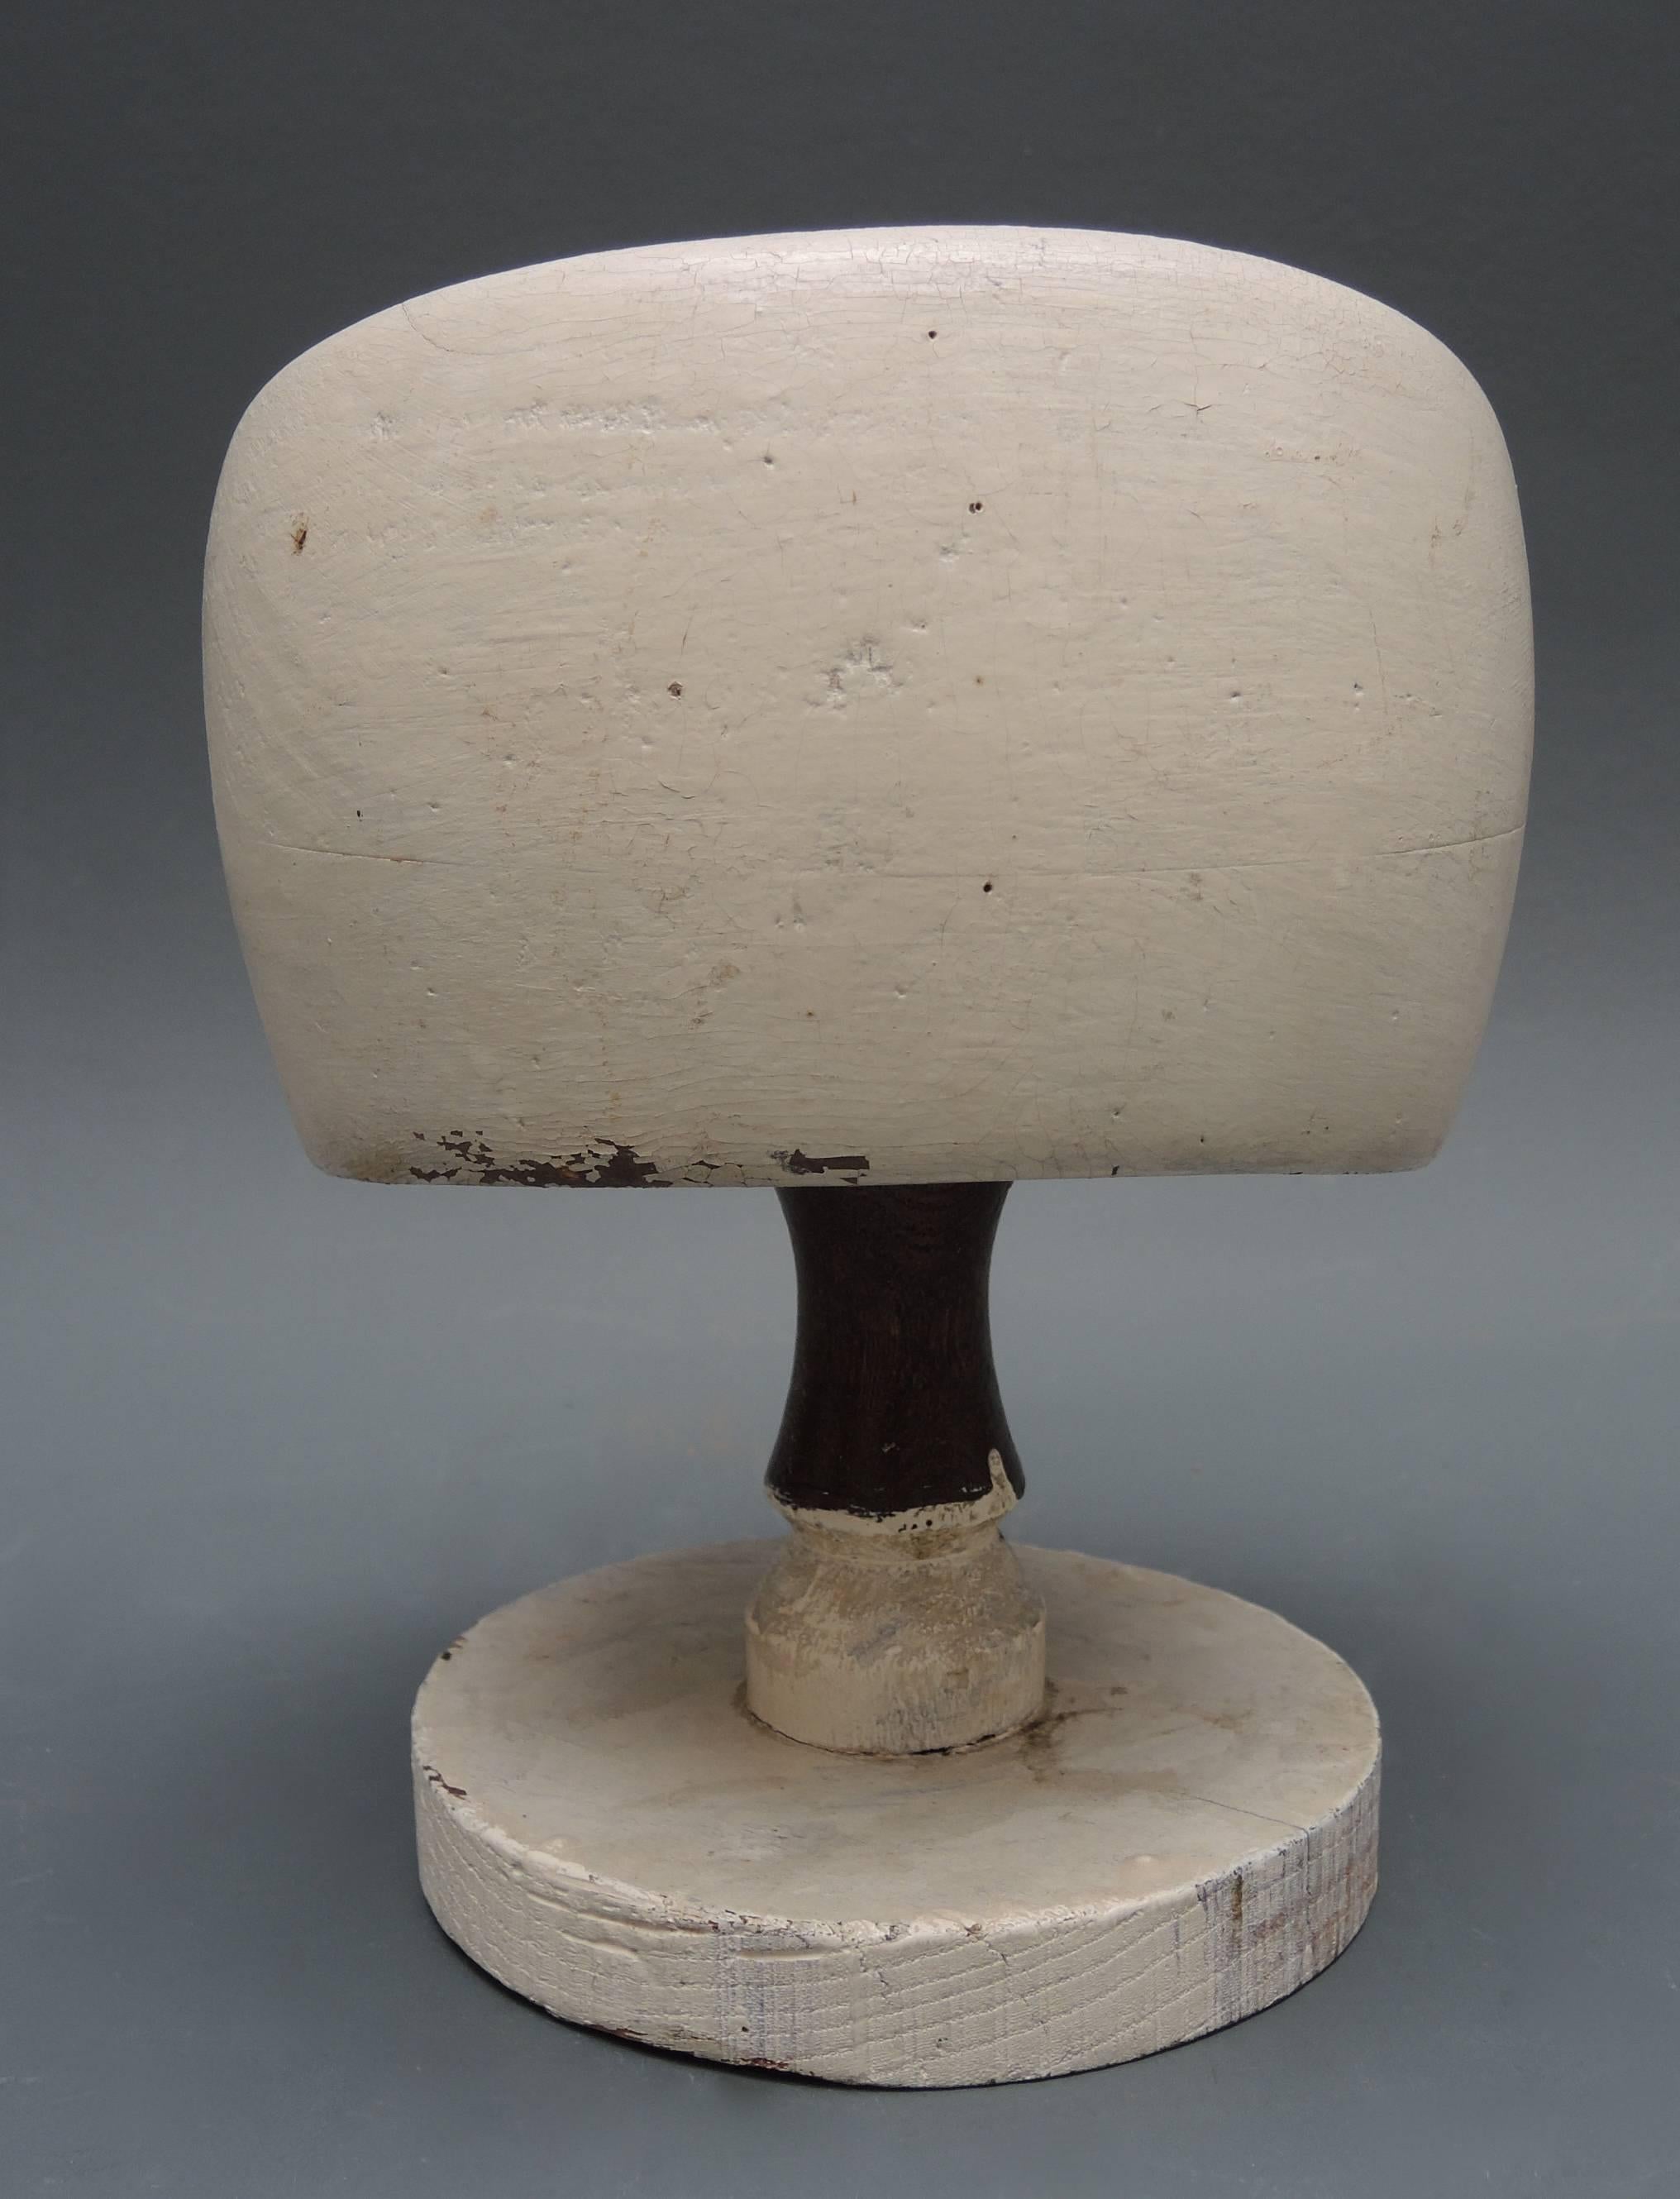 Hand-carved French wood hat block.
This hat form was used by a hat maker to hand form sheets of straw or wool felt using steam to stretch and mold the sheet into the form of the wood mold for the finished hat. Including the original display stand.